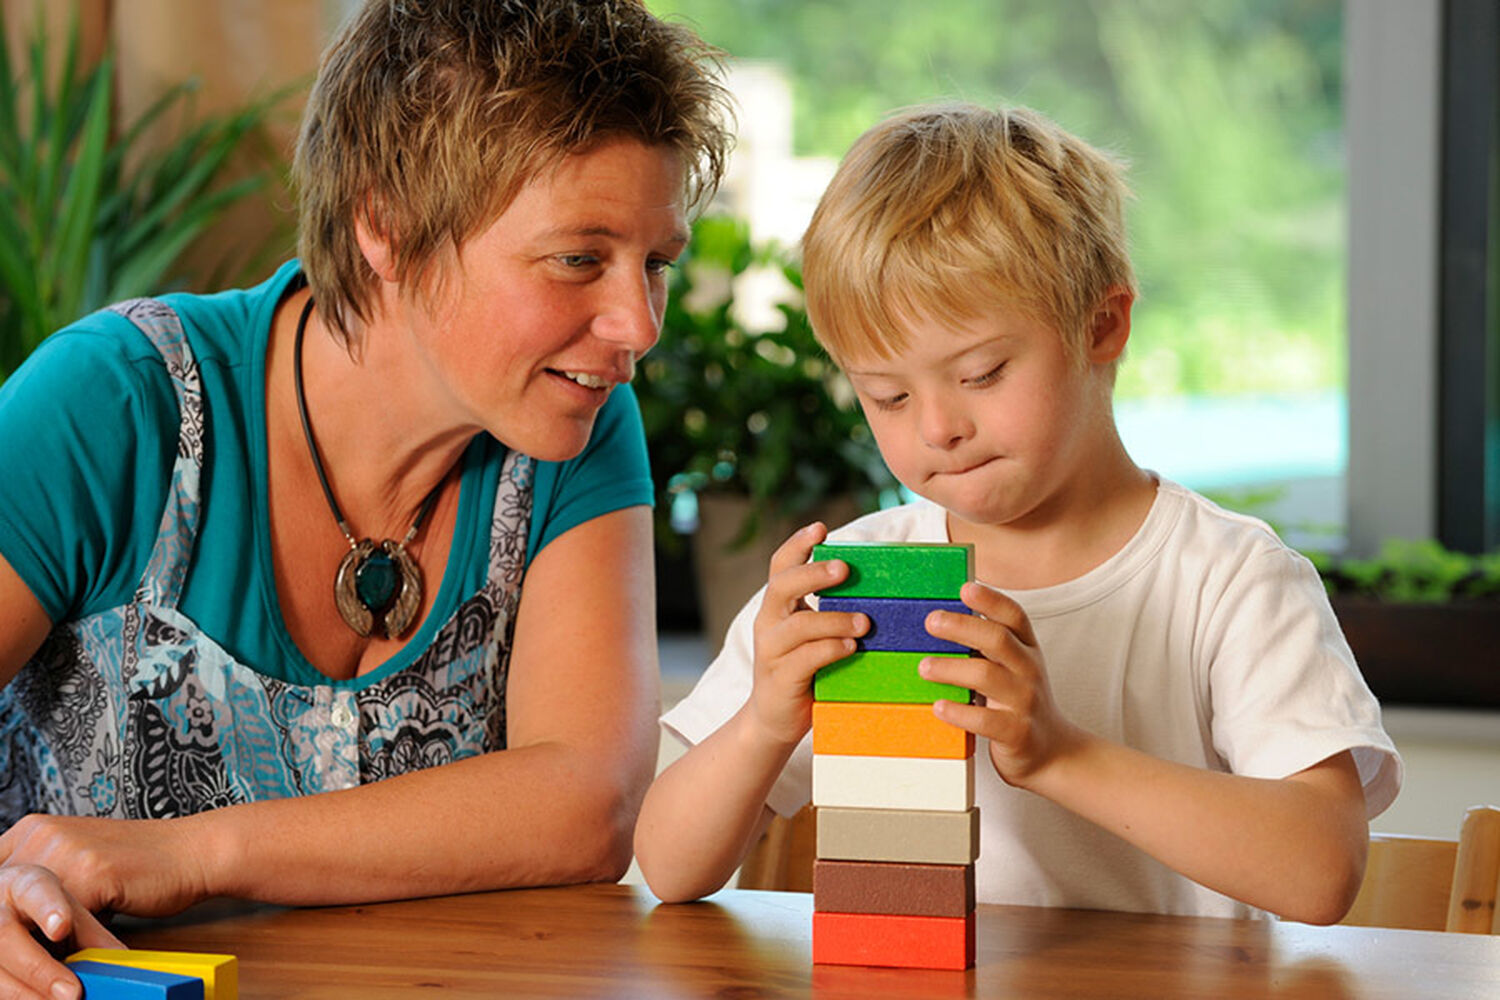 Boy Playing With Blocks While Lady Watches